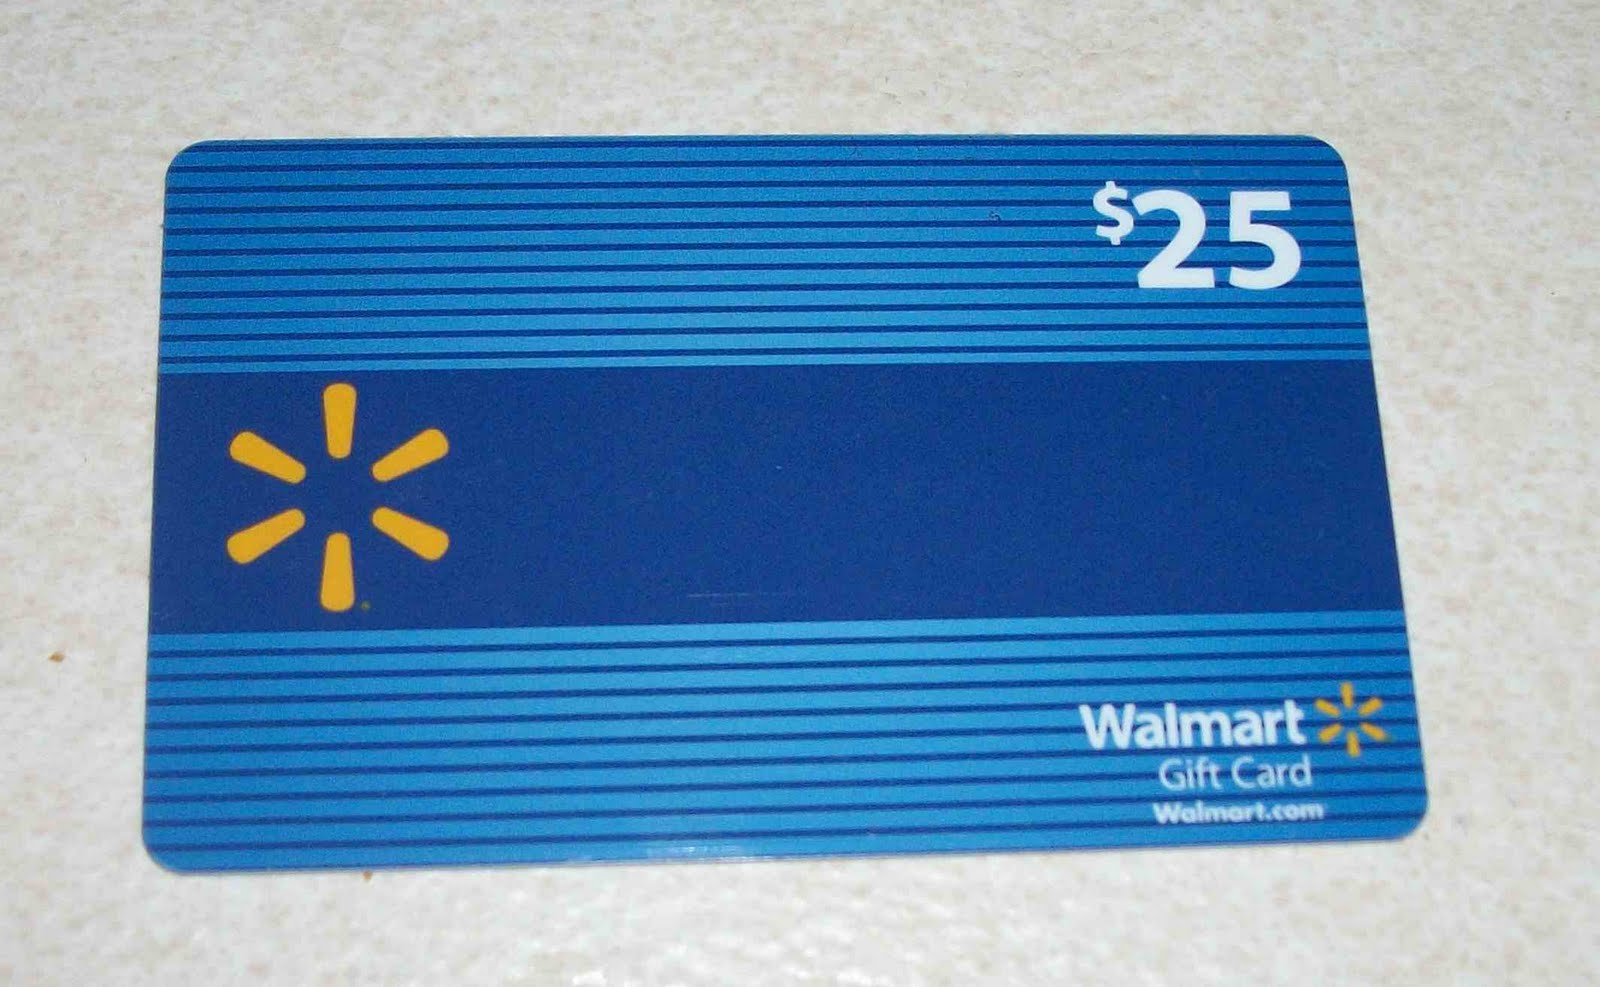 Year 4 Freebies 25 Walmart Gift card received from MyPoints